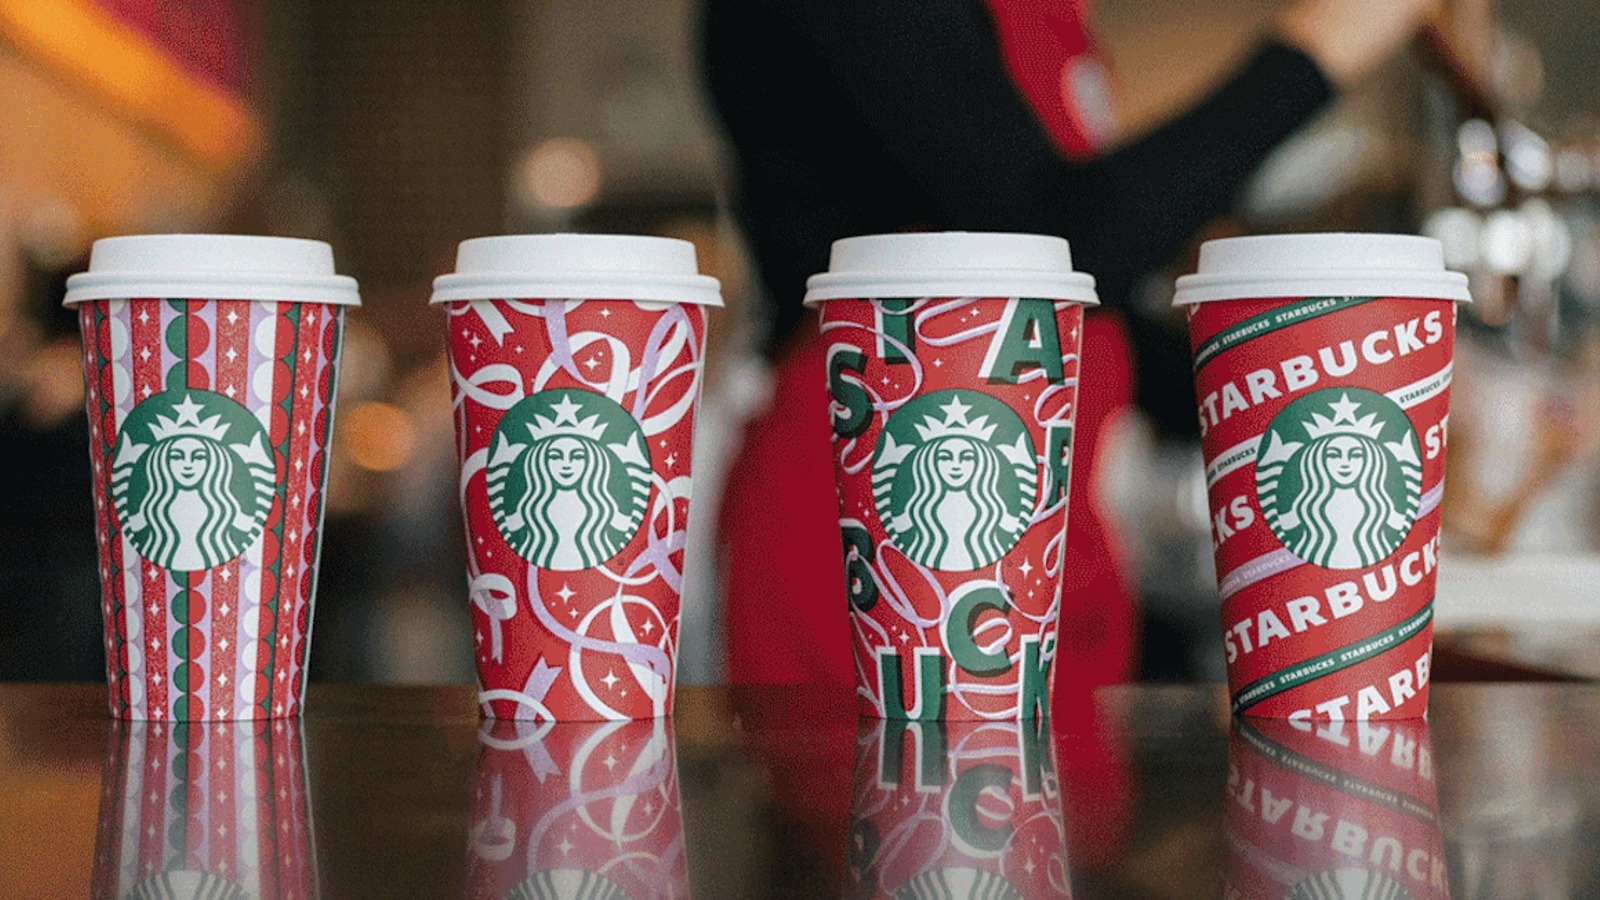 https://www.tastingtable.com/img/gallery/starbucks-leaked-2023-winter-menu-includes-new-gingerbread-chai-and-cold-foams/l-intro-1695668522.jpg